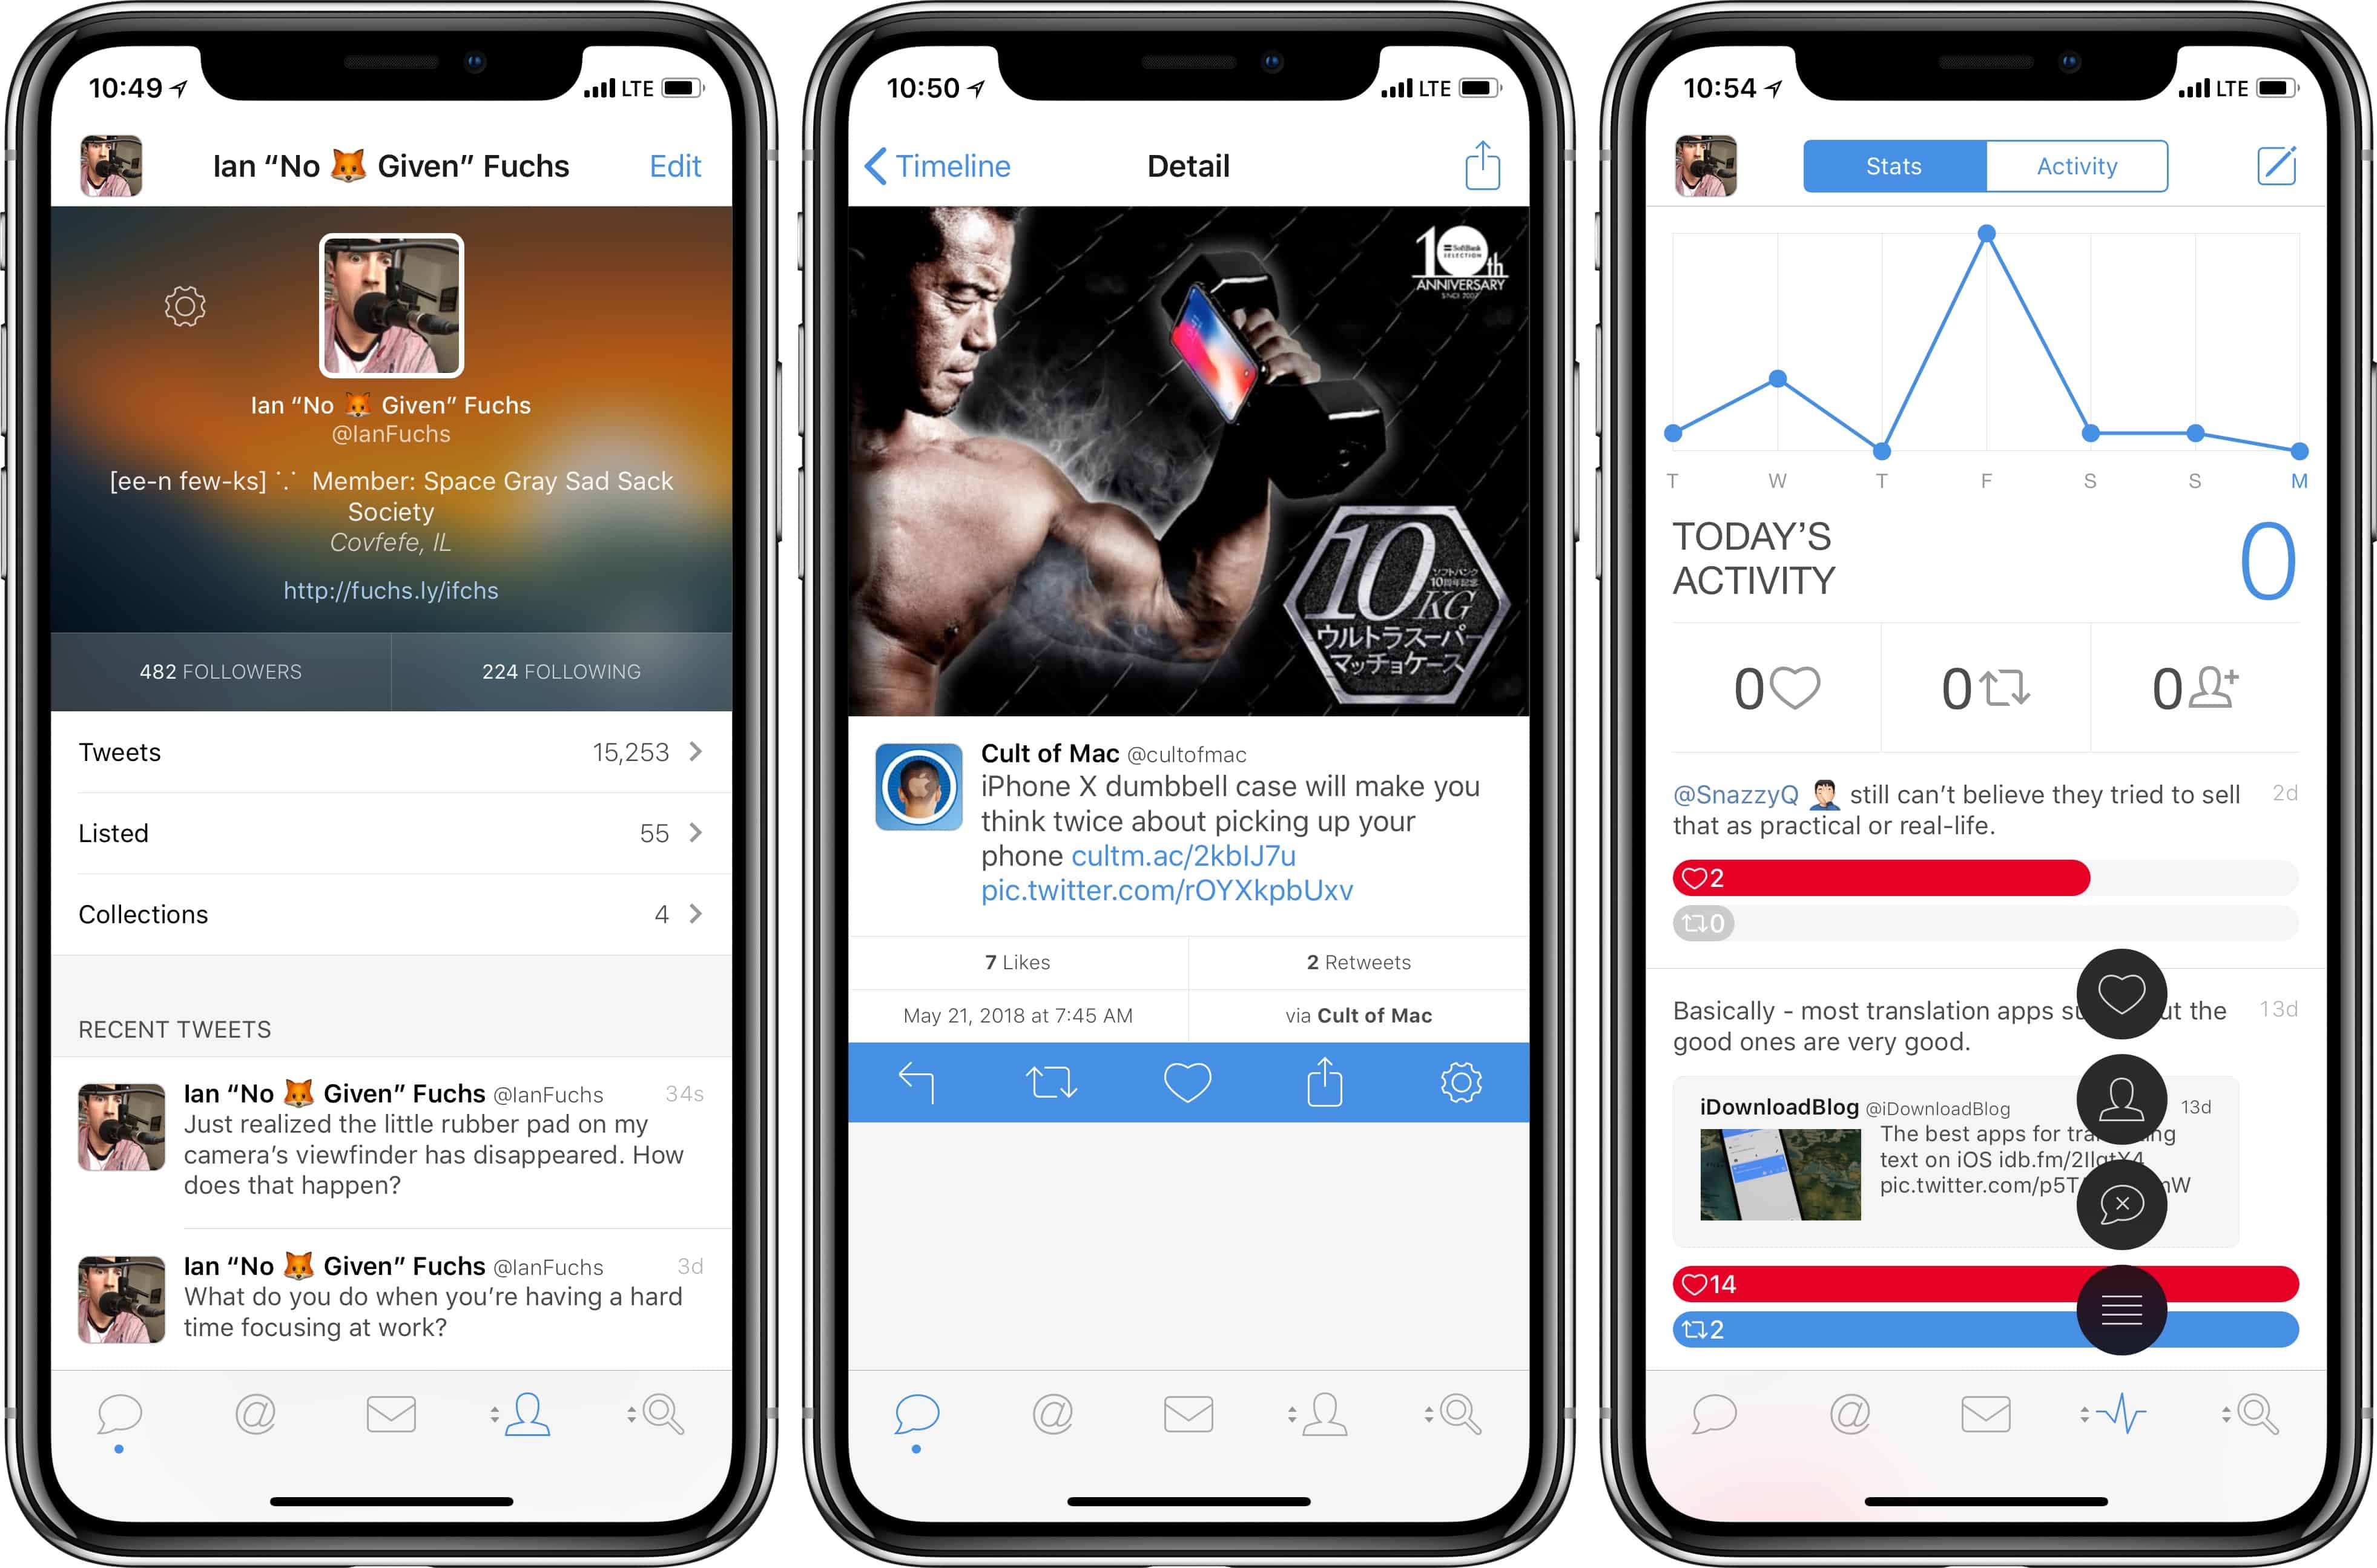 Tweetbot on iOS profile, tweet, and activity view